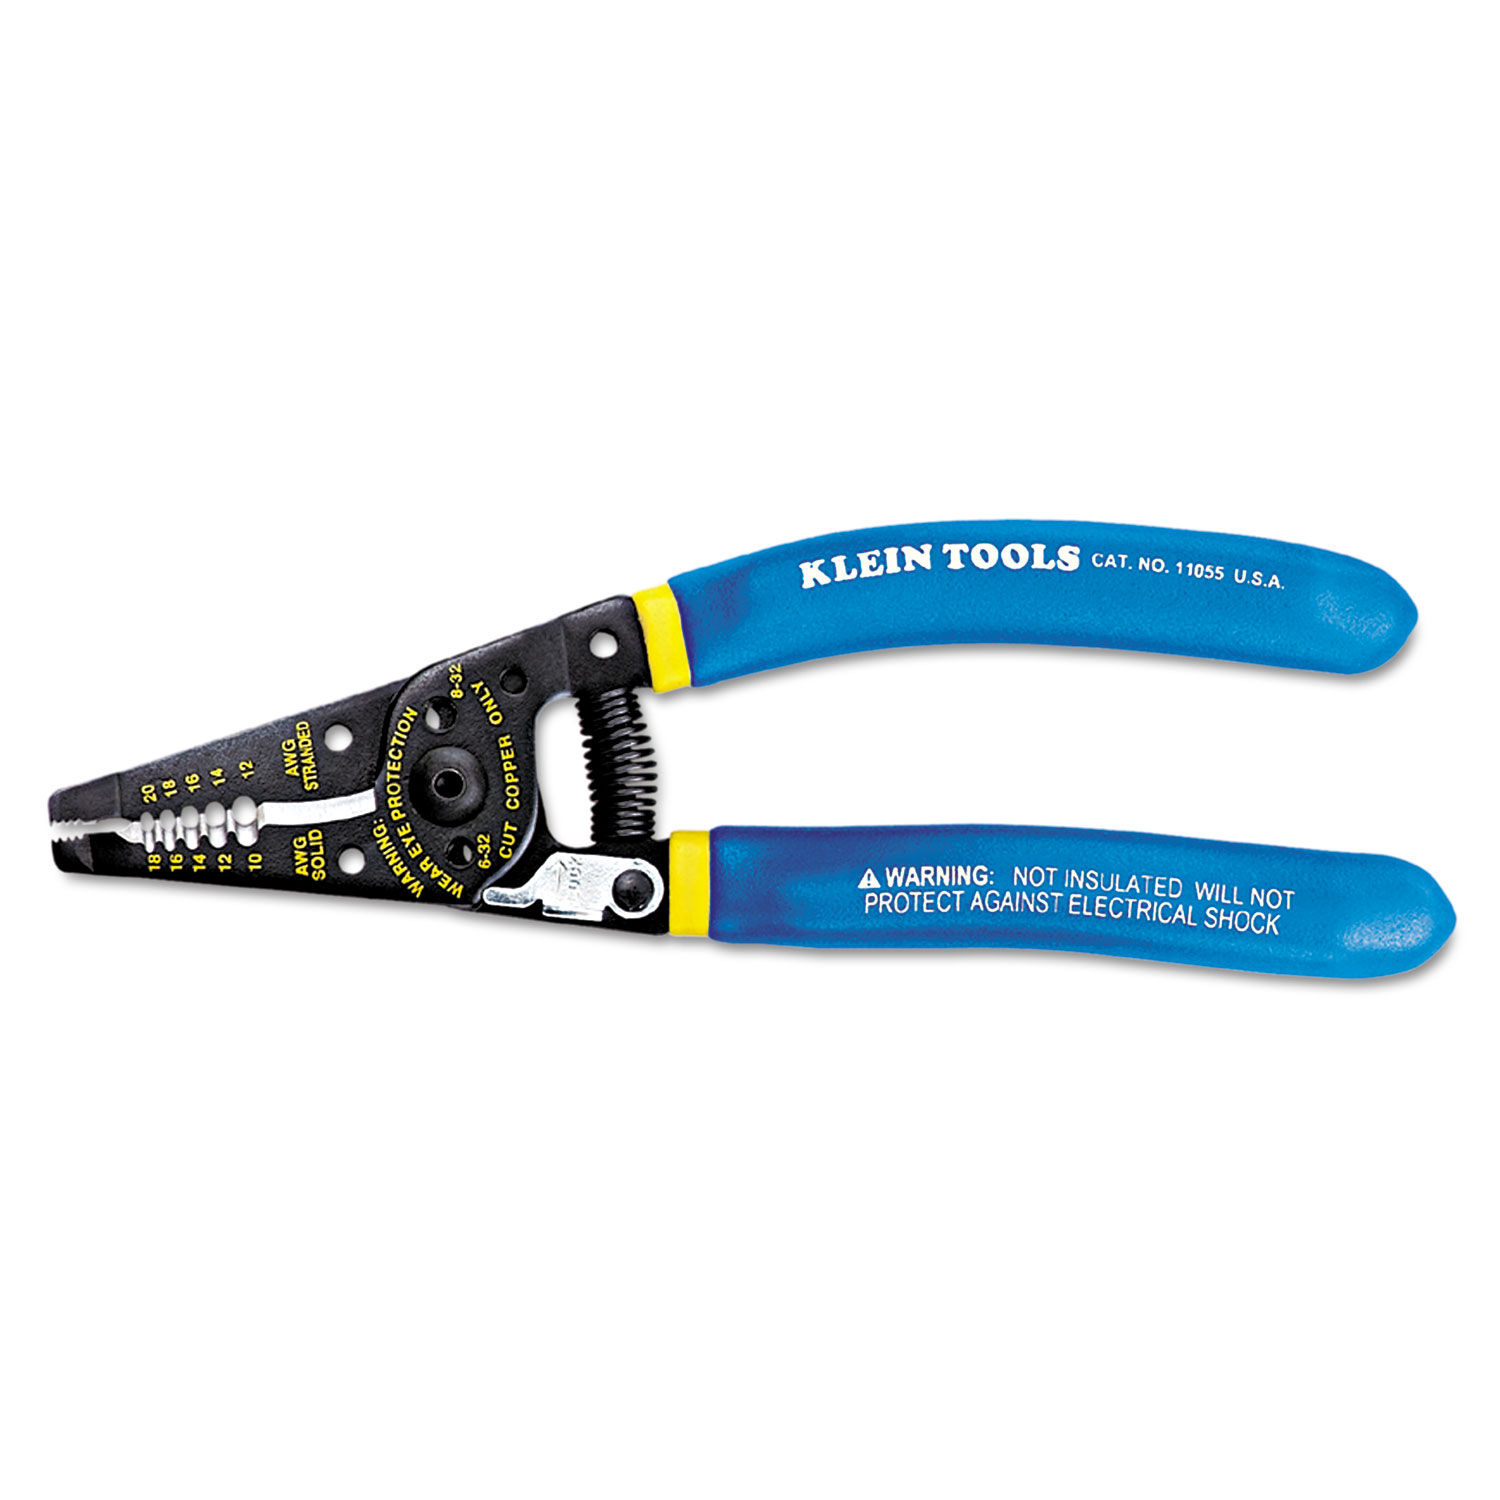 Wire Stripper/Cutter, 10-18 AWG, 7 1/8 Tool Length, Blue/Yellow Handle